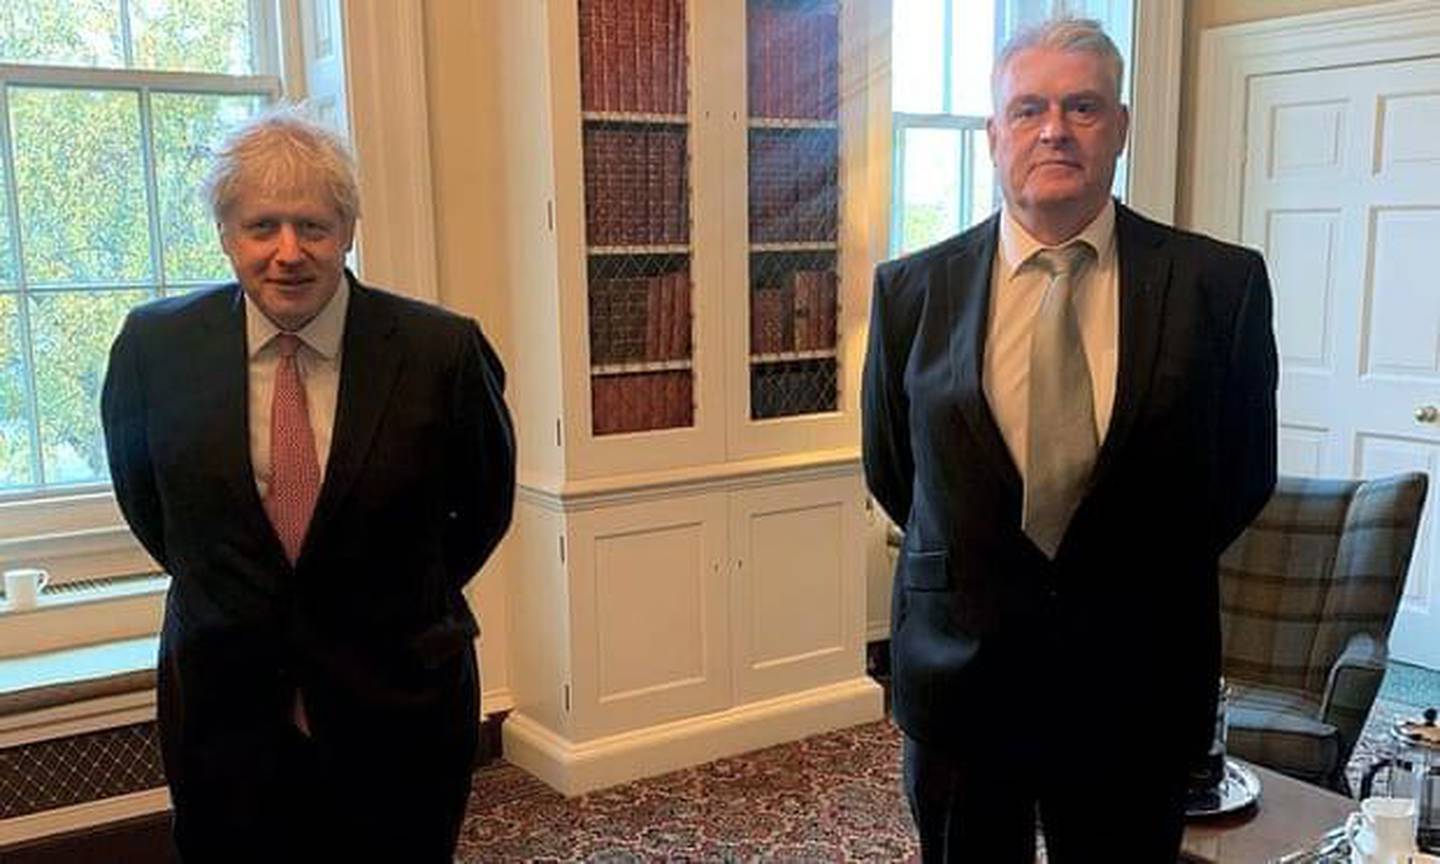 The British leader spent about 35 minutes in a meeting with Conservative MPs on Thursday morning. One of the MPs present, Lee Anderson, right, since tested positive for the virus. Lee Anderson official Facebook